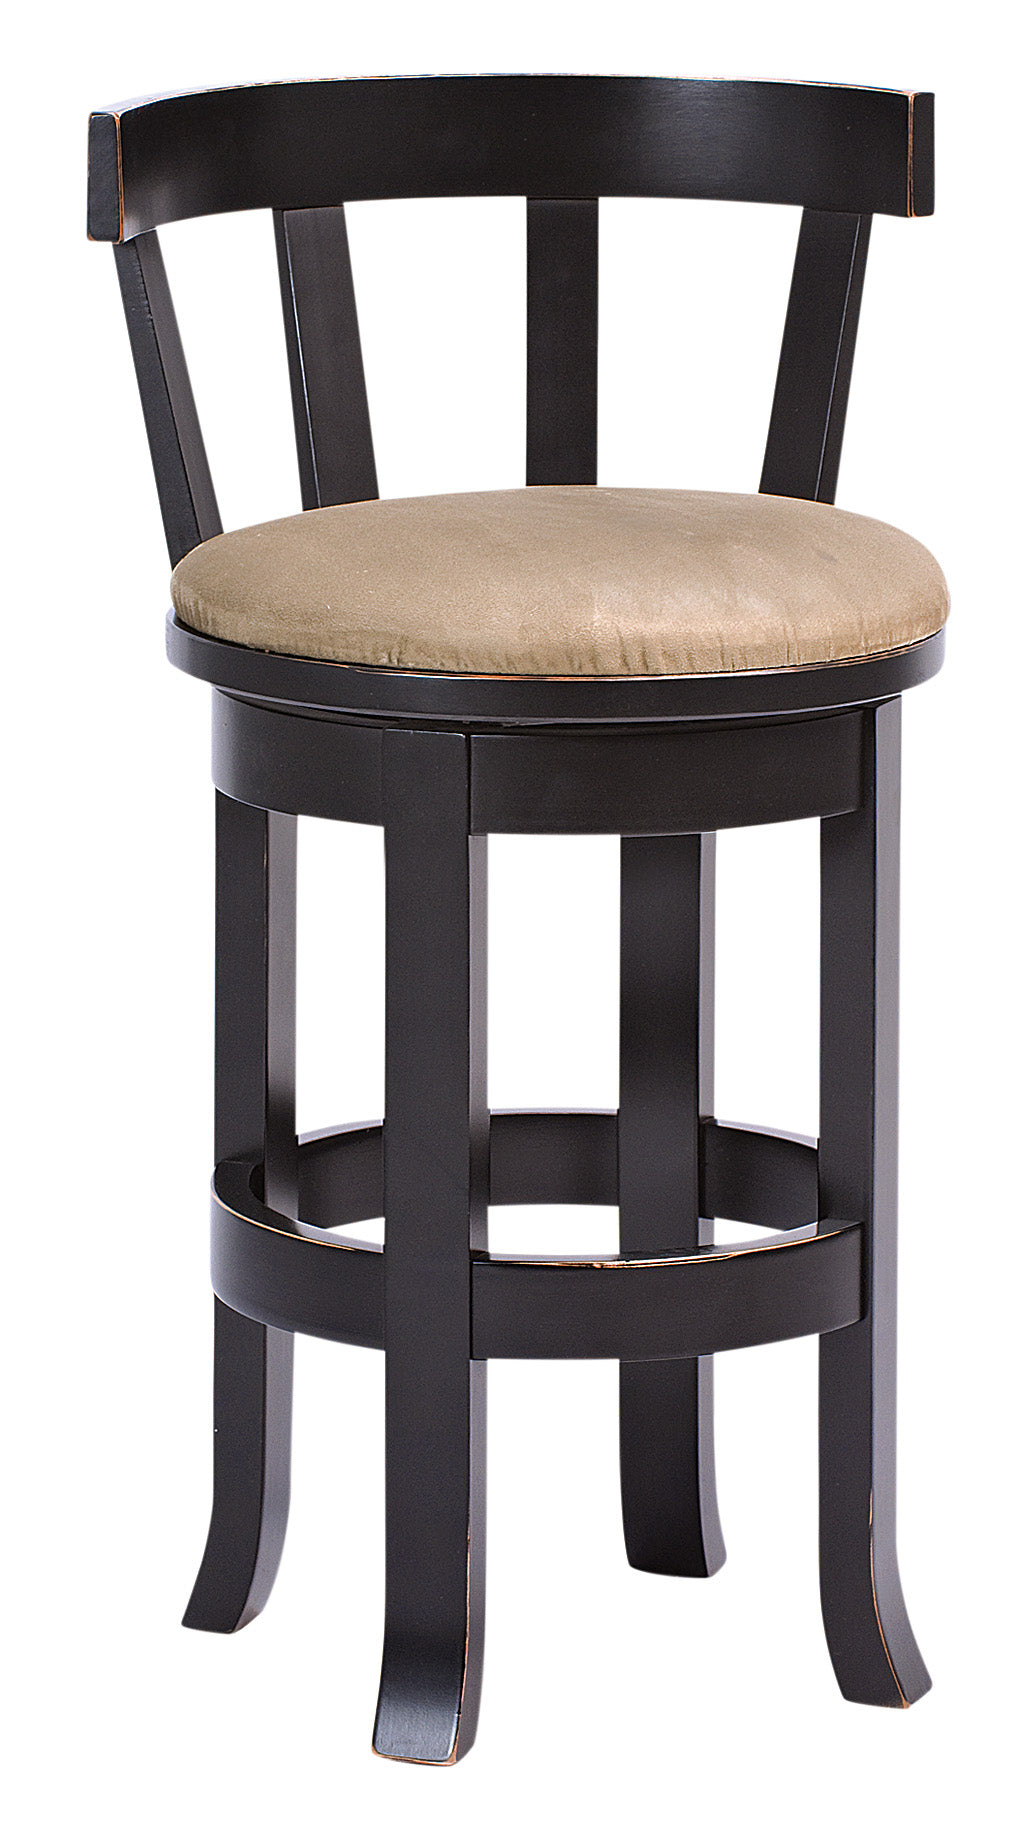 Amish Belmont Swivel Barstool with Meribeth Top in Brown Maple - Quick Ship